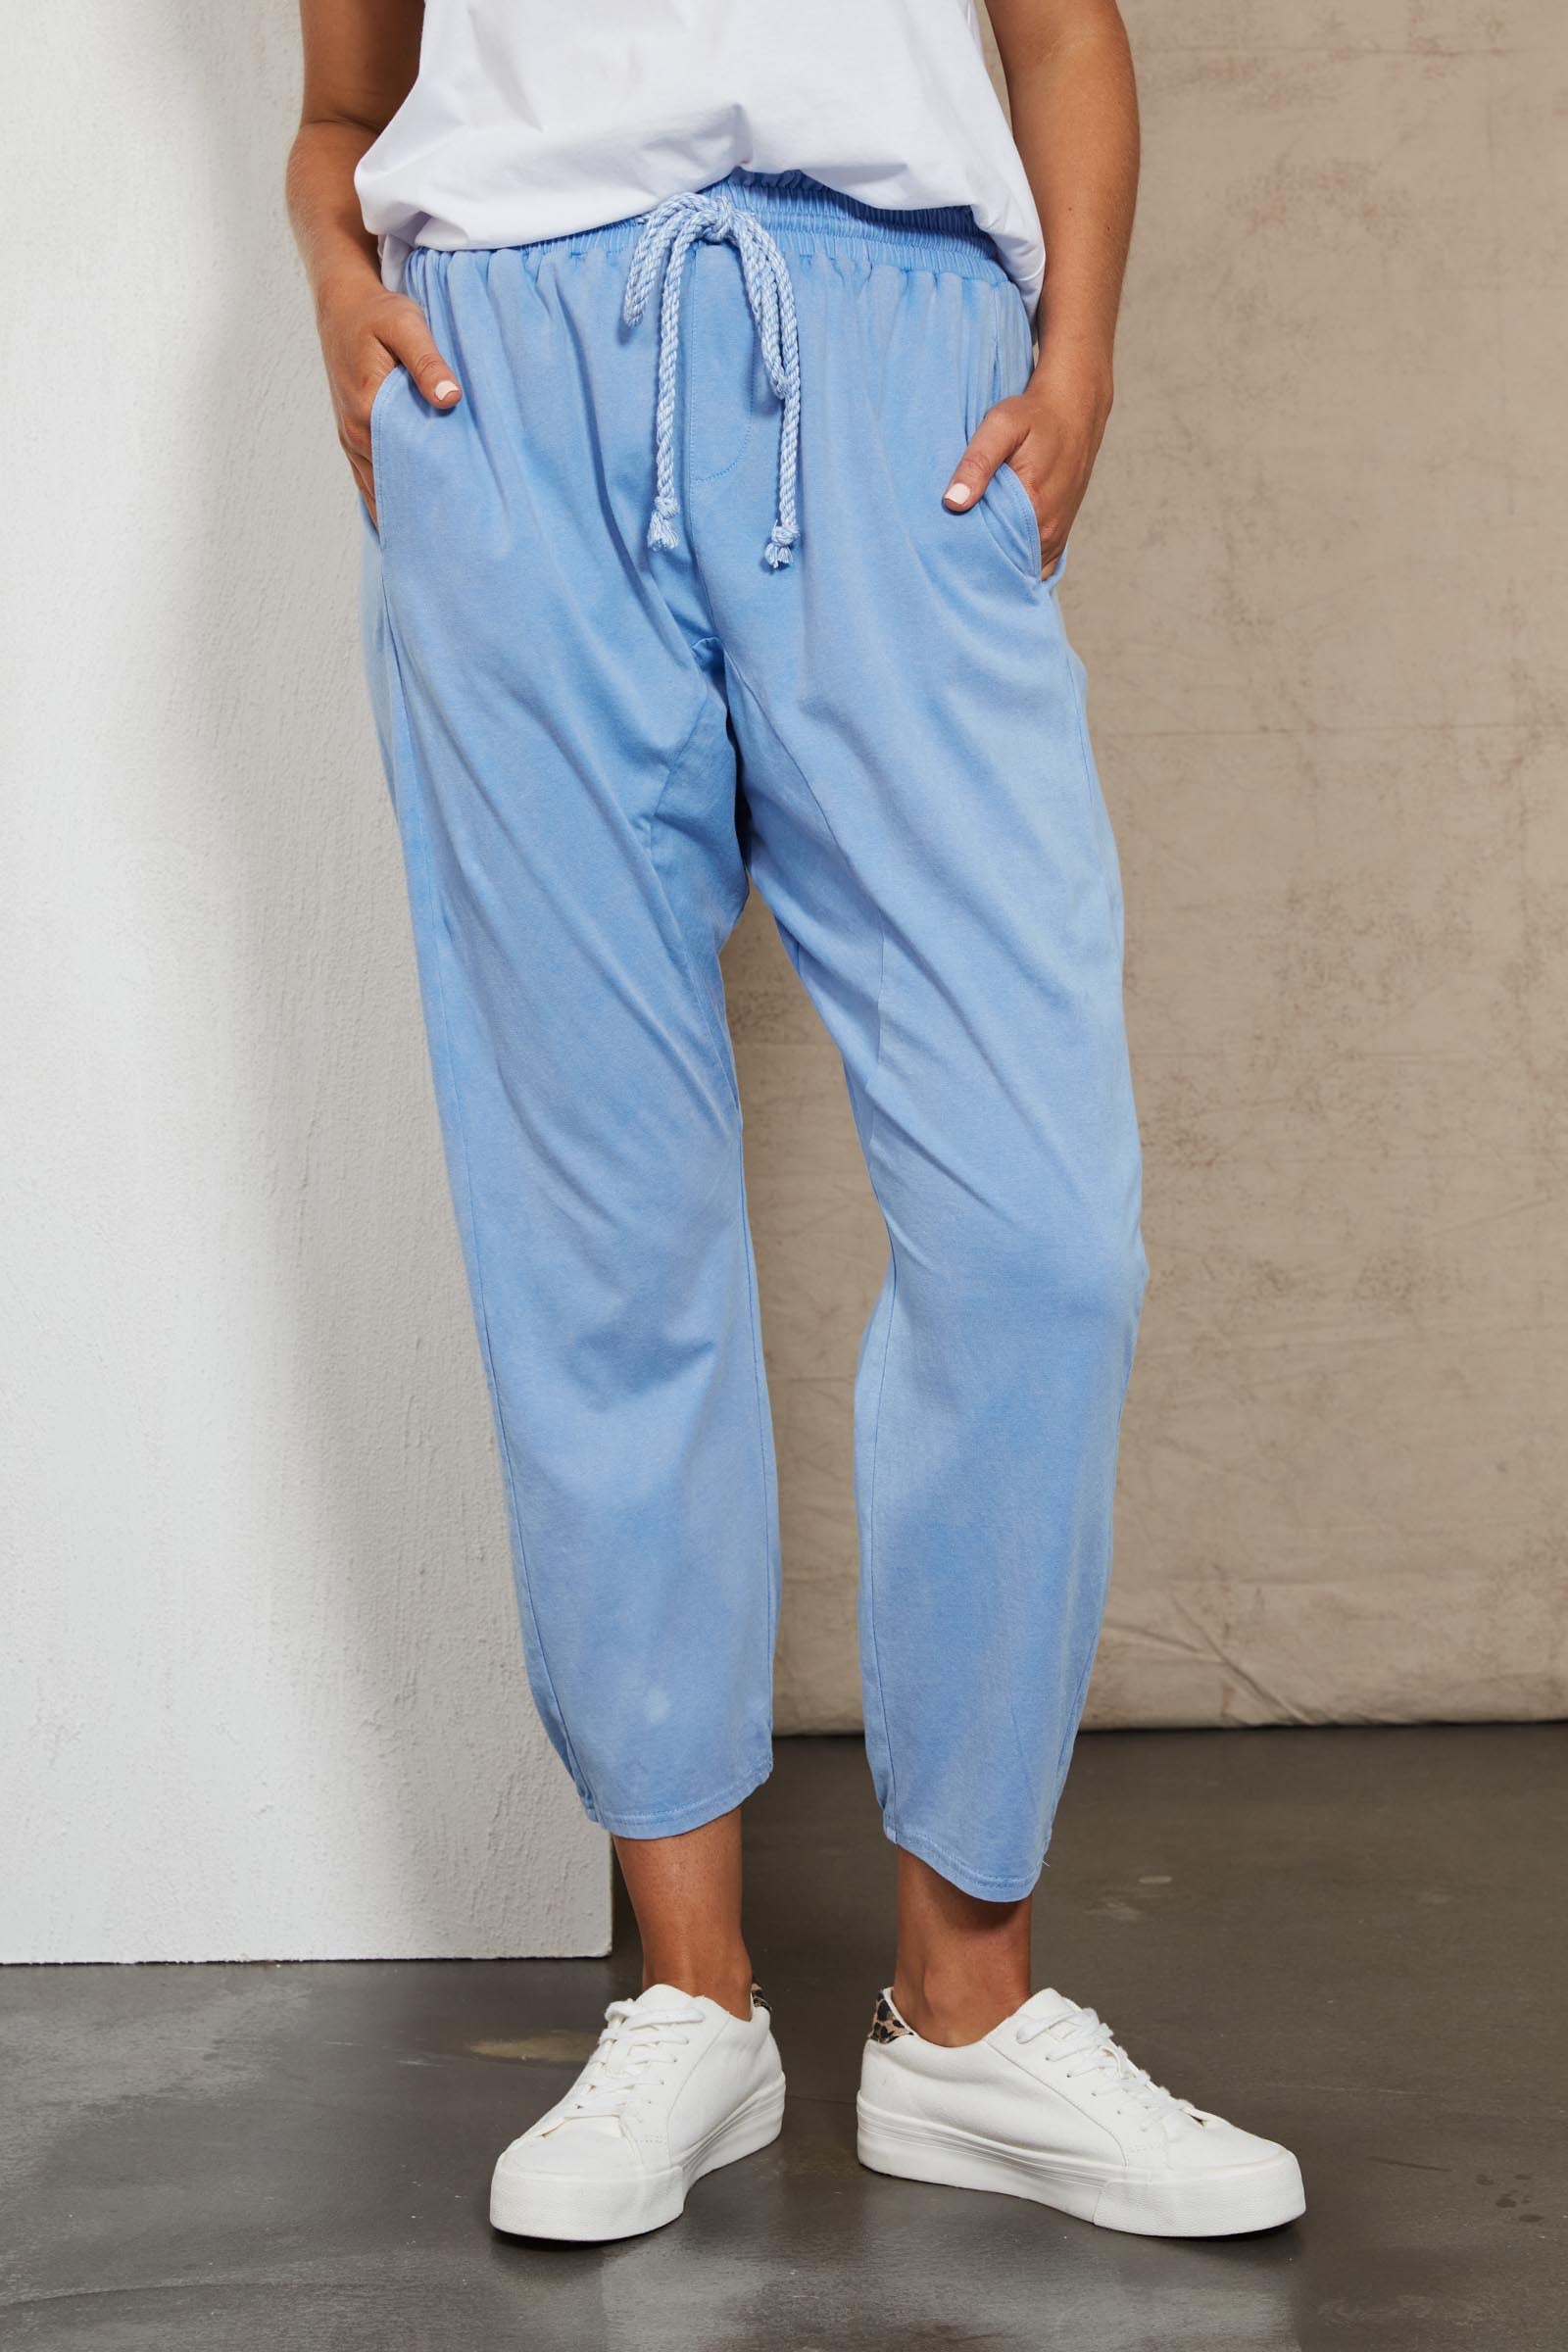 Marra Relaxed Pant - Bleu - eb&ive Clothing - Pant Relaxed